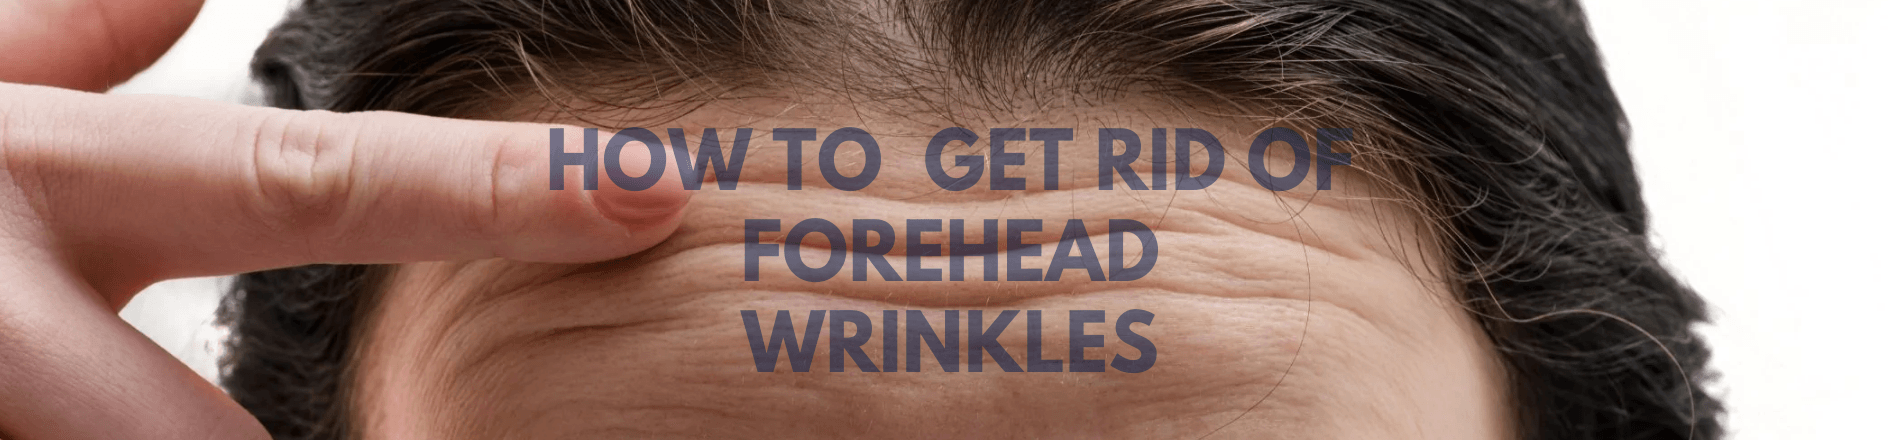 How to Get Rid of Forehead Wrinkles, According to a Dermatologist - 1st Mini Skincare Fridges With LED Mirror | COOSEON®